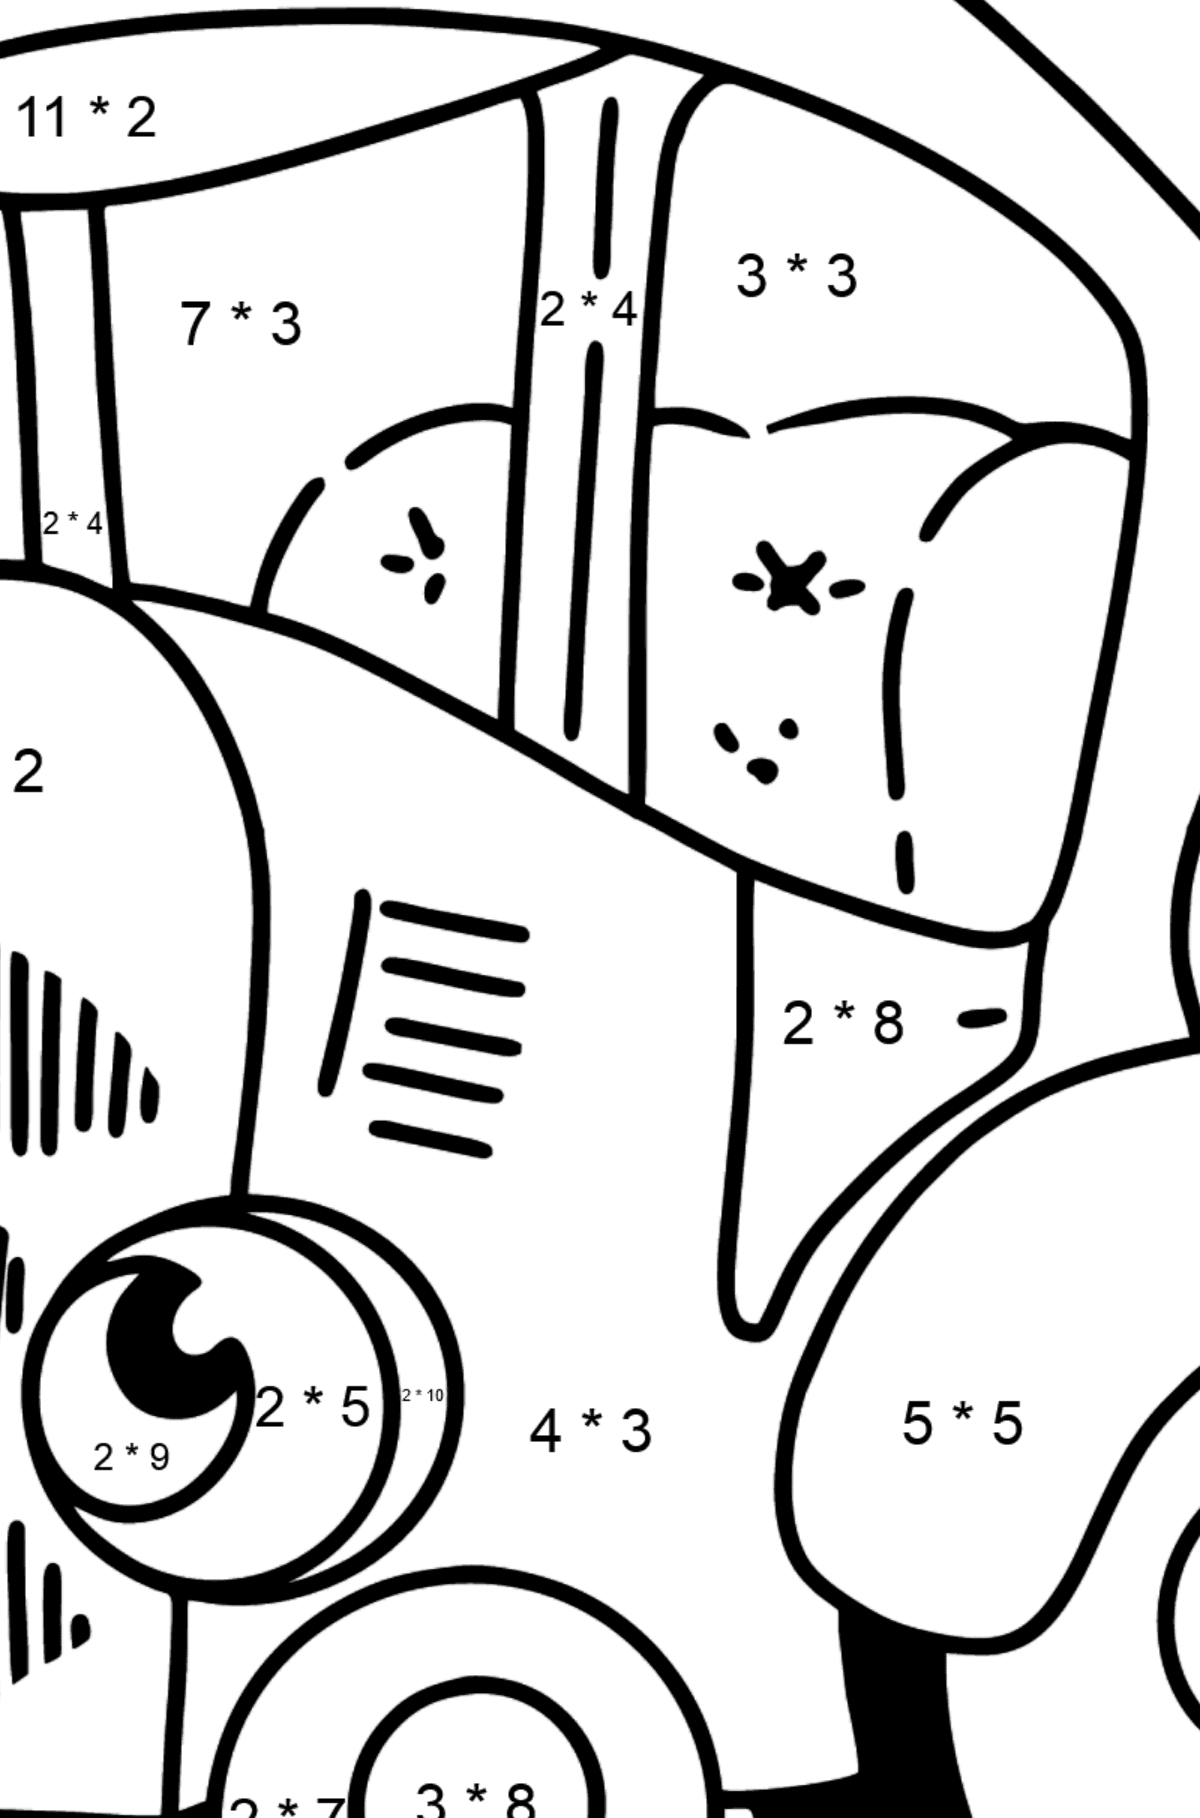 Blue Tractor coloring page - Math Coloring - Multiplication for Kids